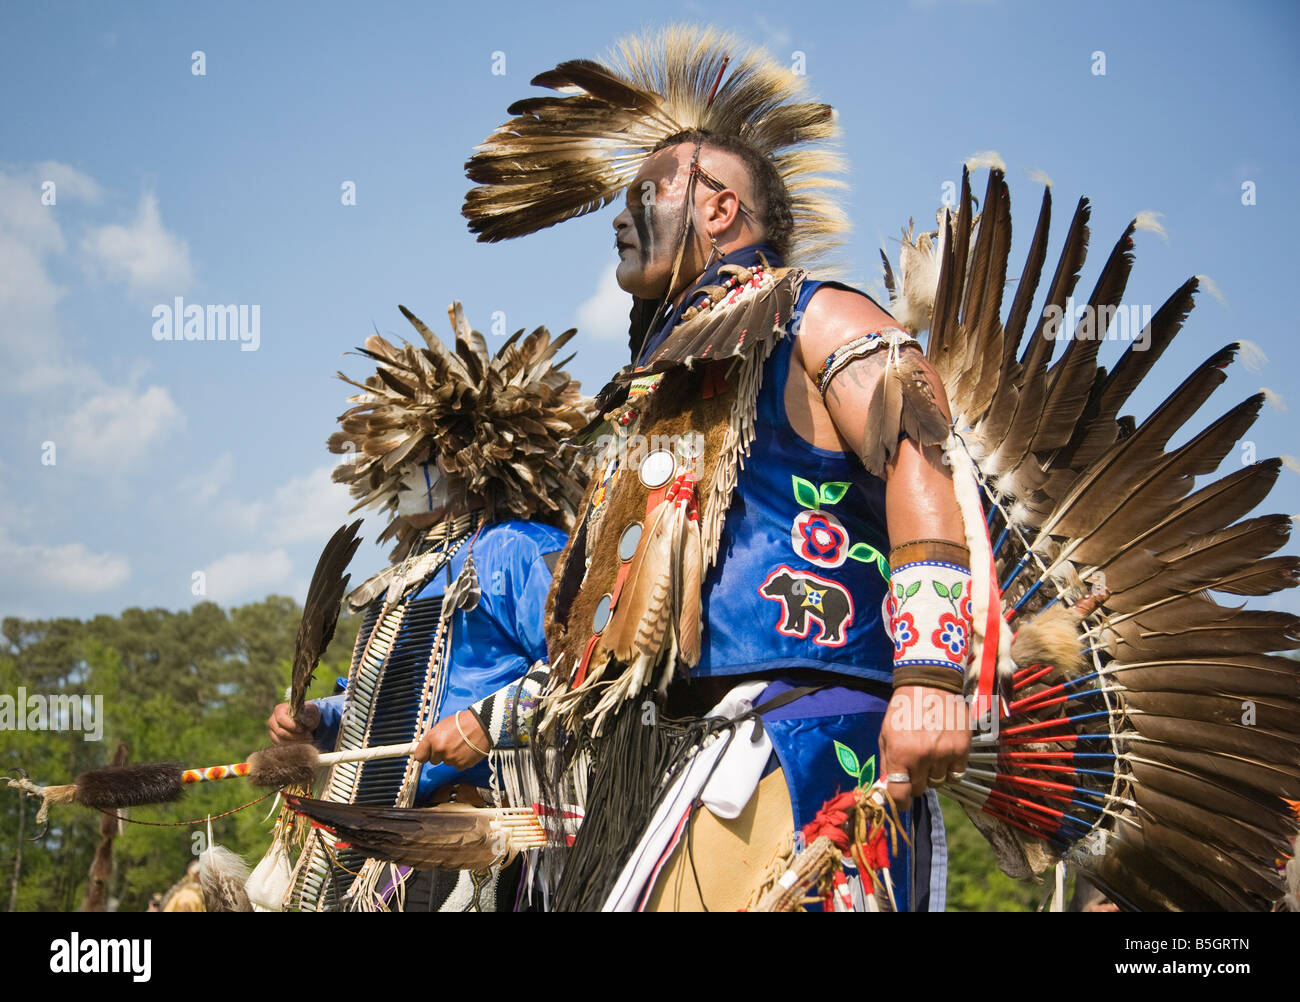 Native American from the Micmac tribe of Canada (far side) and his 'dancing brother' at the 8th Annual Redwing PowWow, Virginia. Stock Photo